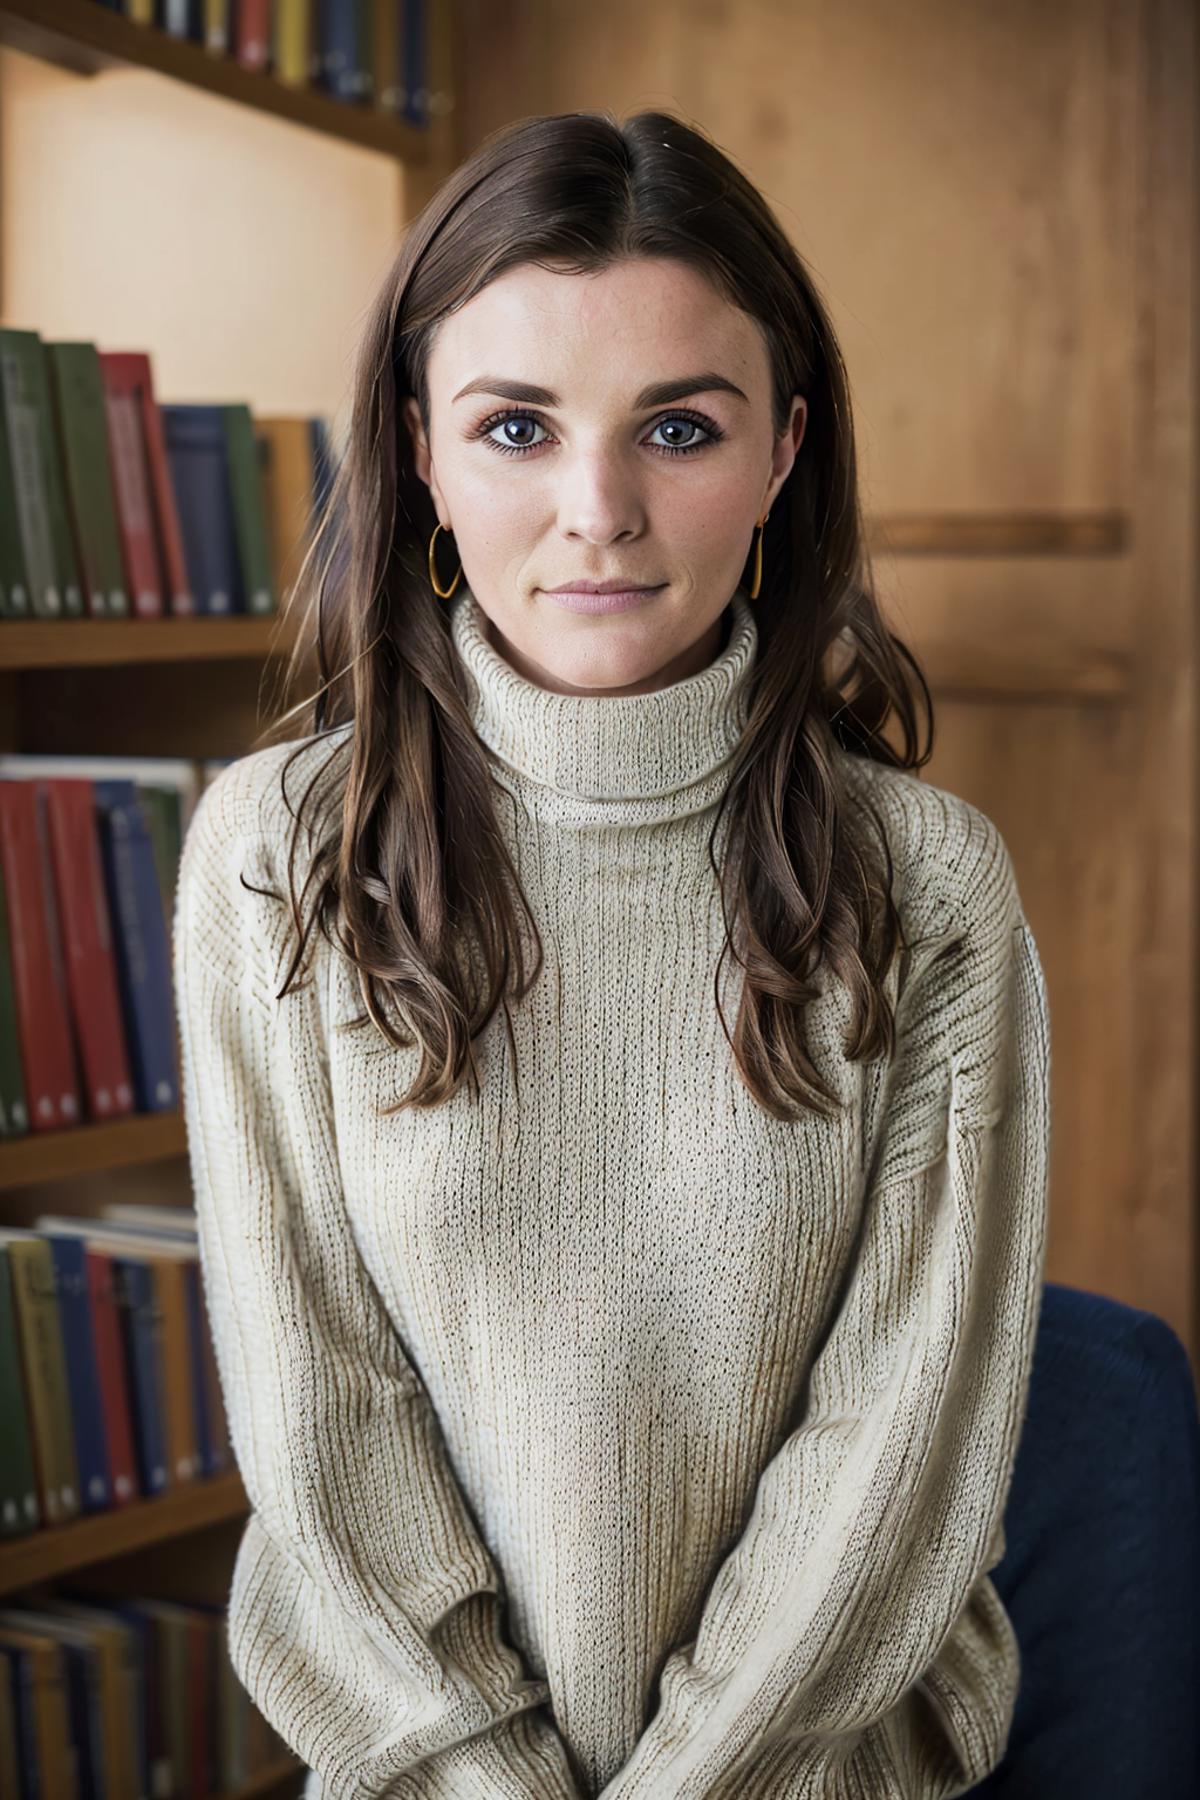 Aisling Bea image by rogueAI